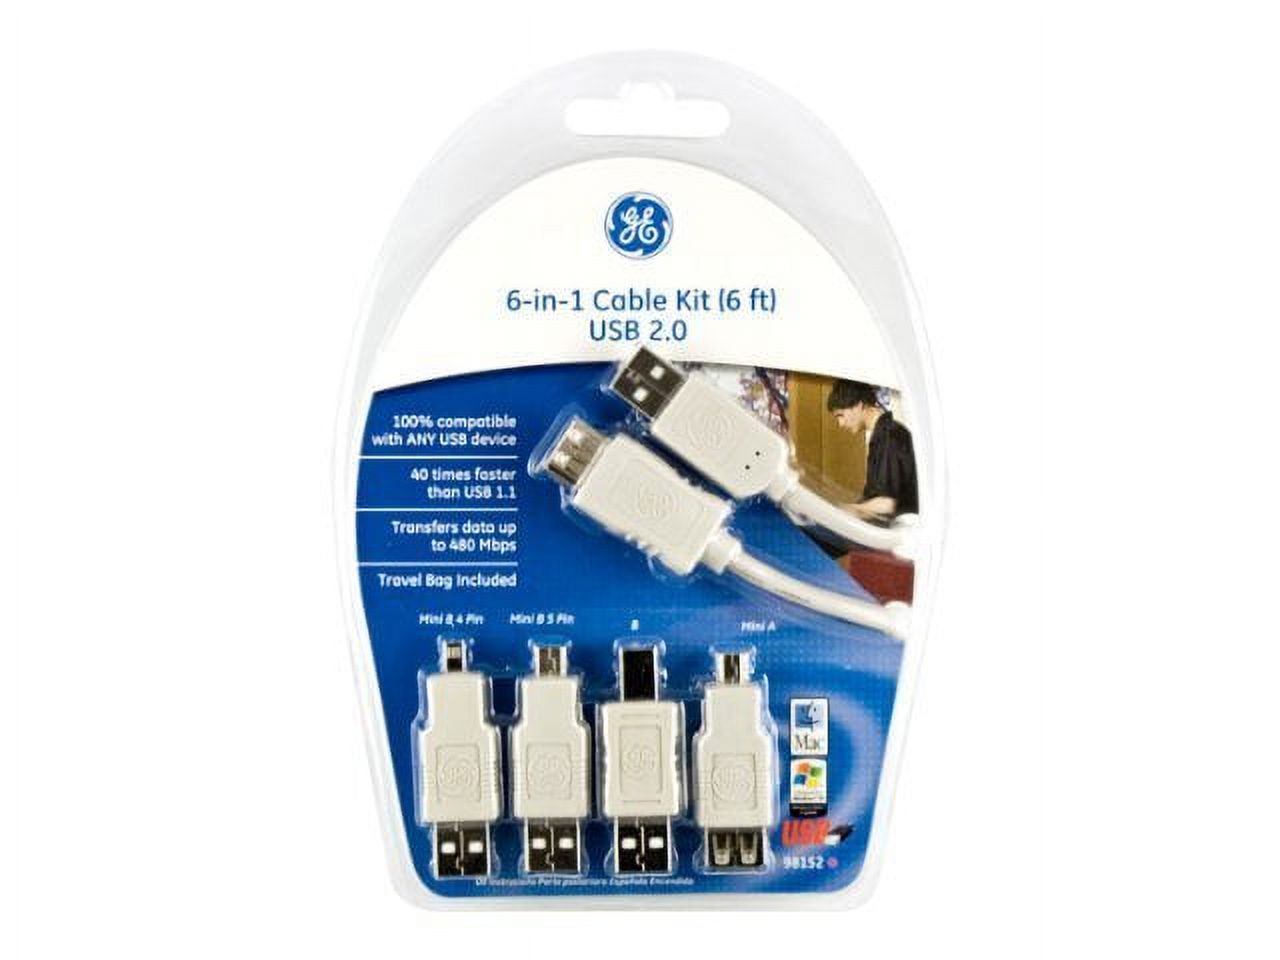 GE 98152 USB 2.0 Cable Kit, 6ft - image 1 of 2